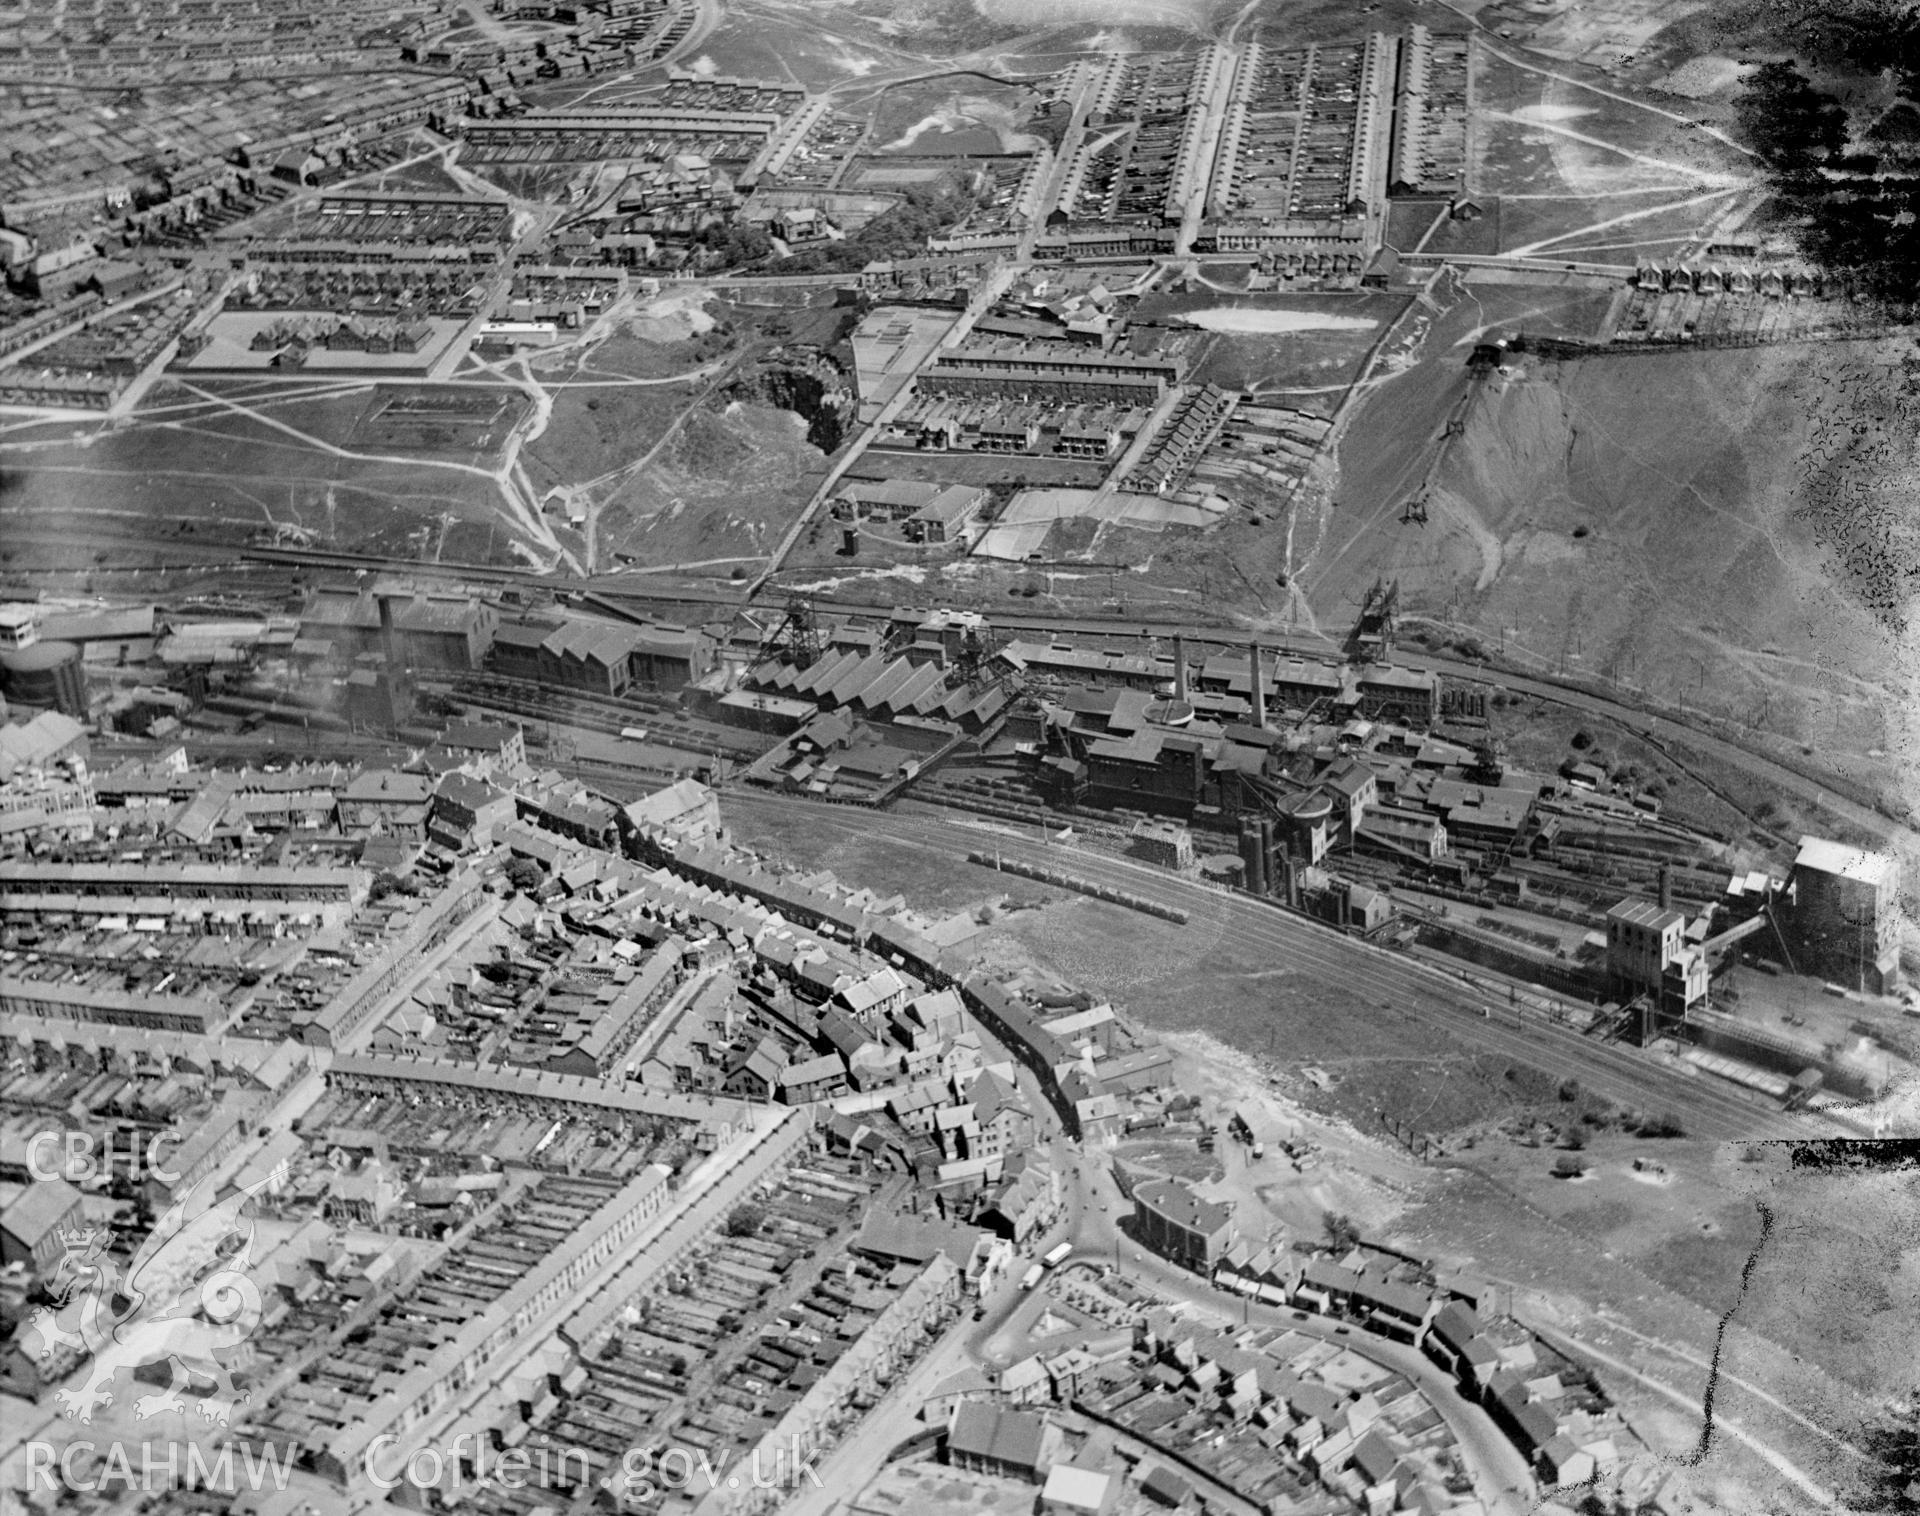 View of Aberbargoed and Bargoed with Bargoed Colliery in the centre,  oblique aerial view. 5?x4? black and white glass plate negative.